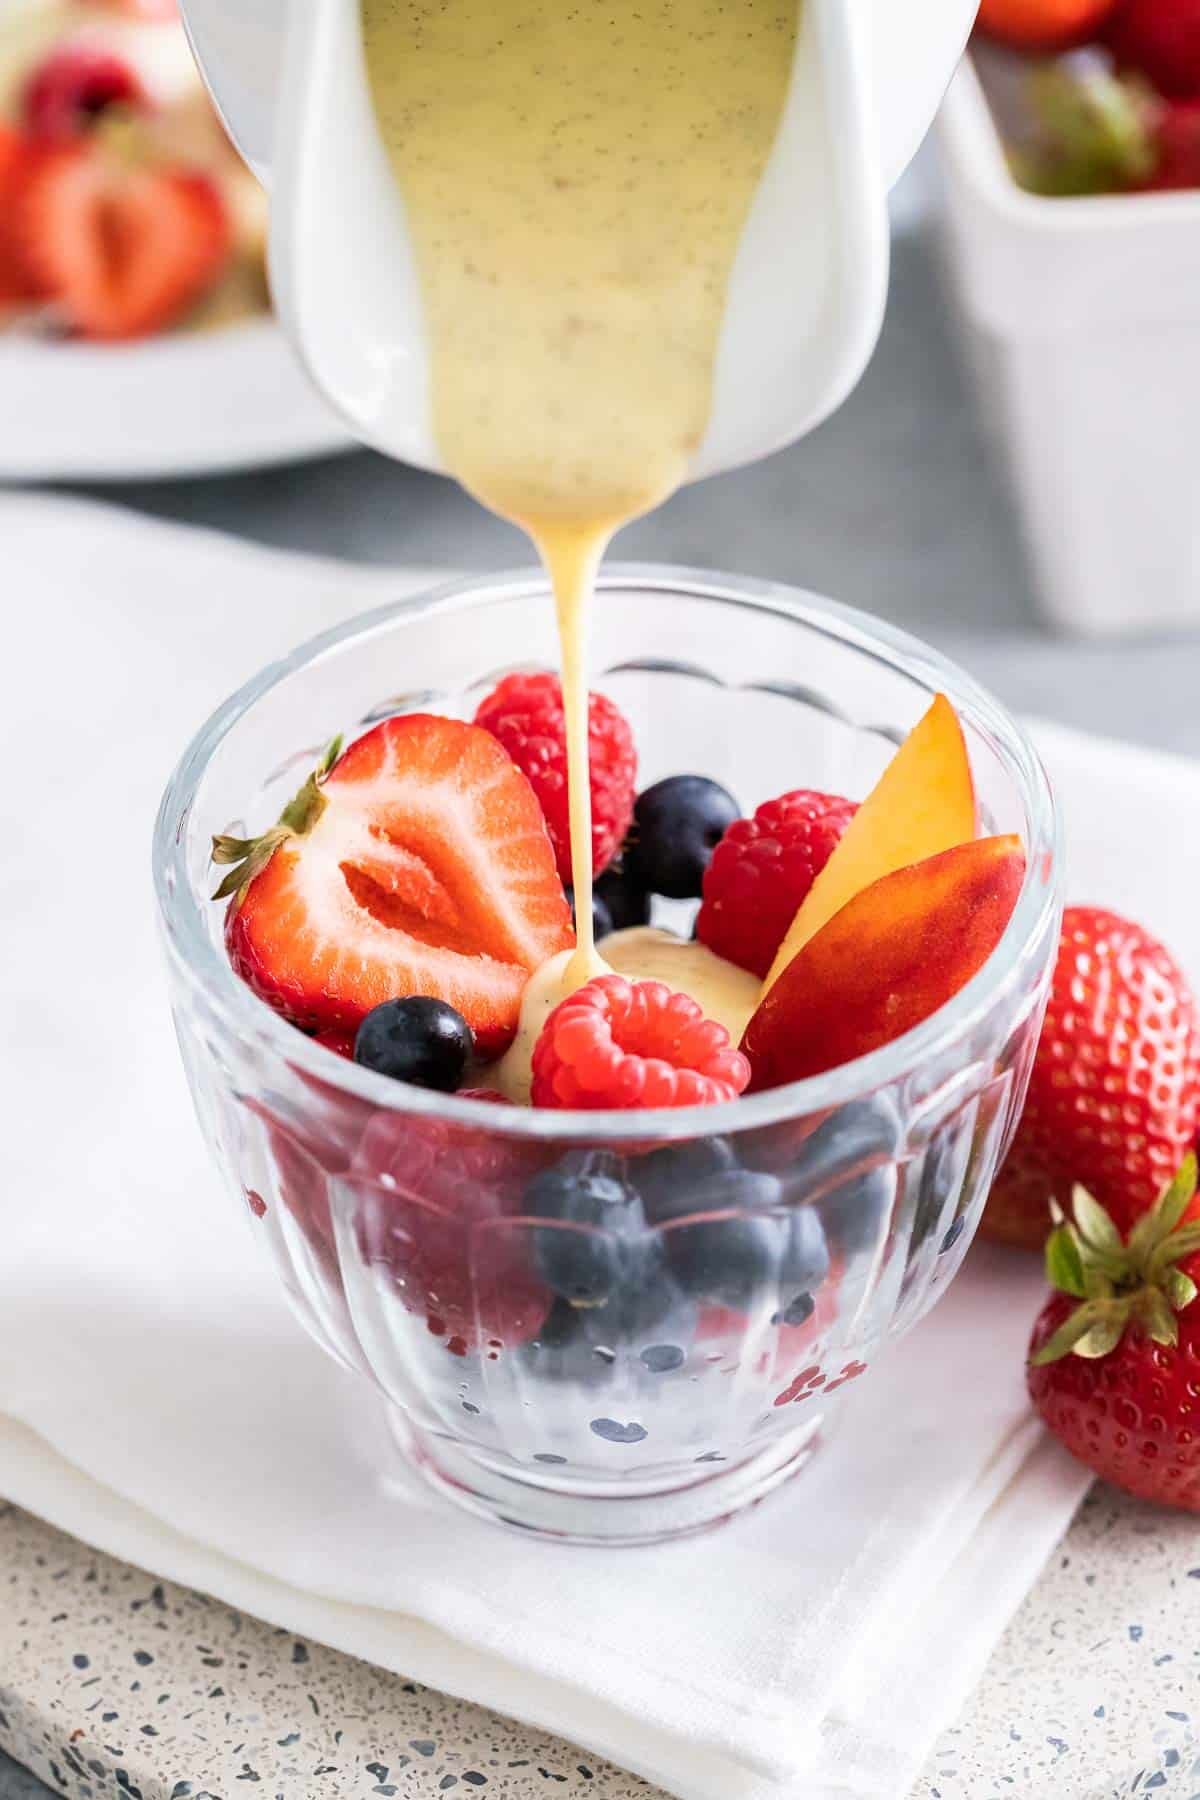 Vanilla sauce being poured over berries in a glass bowl..